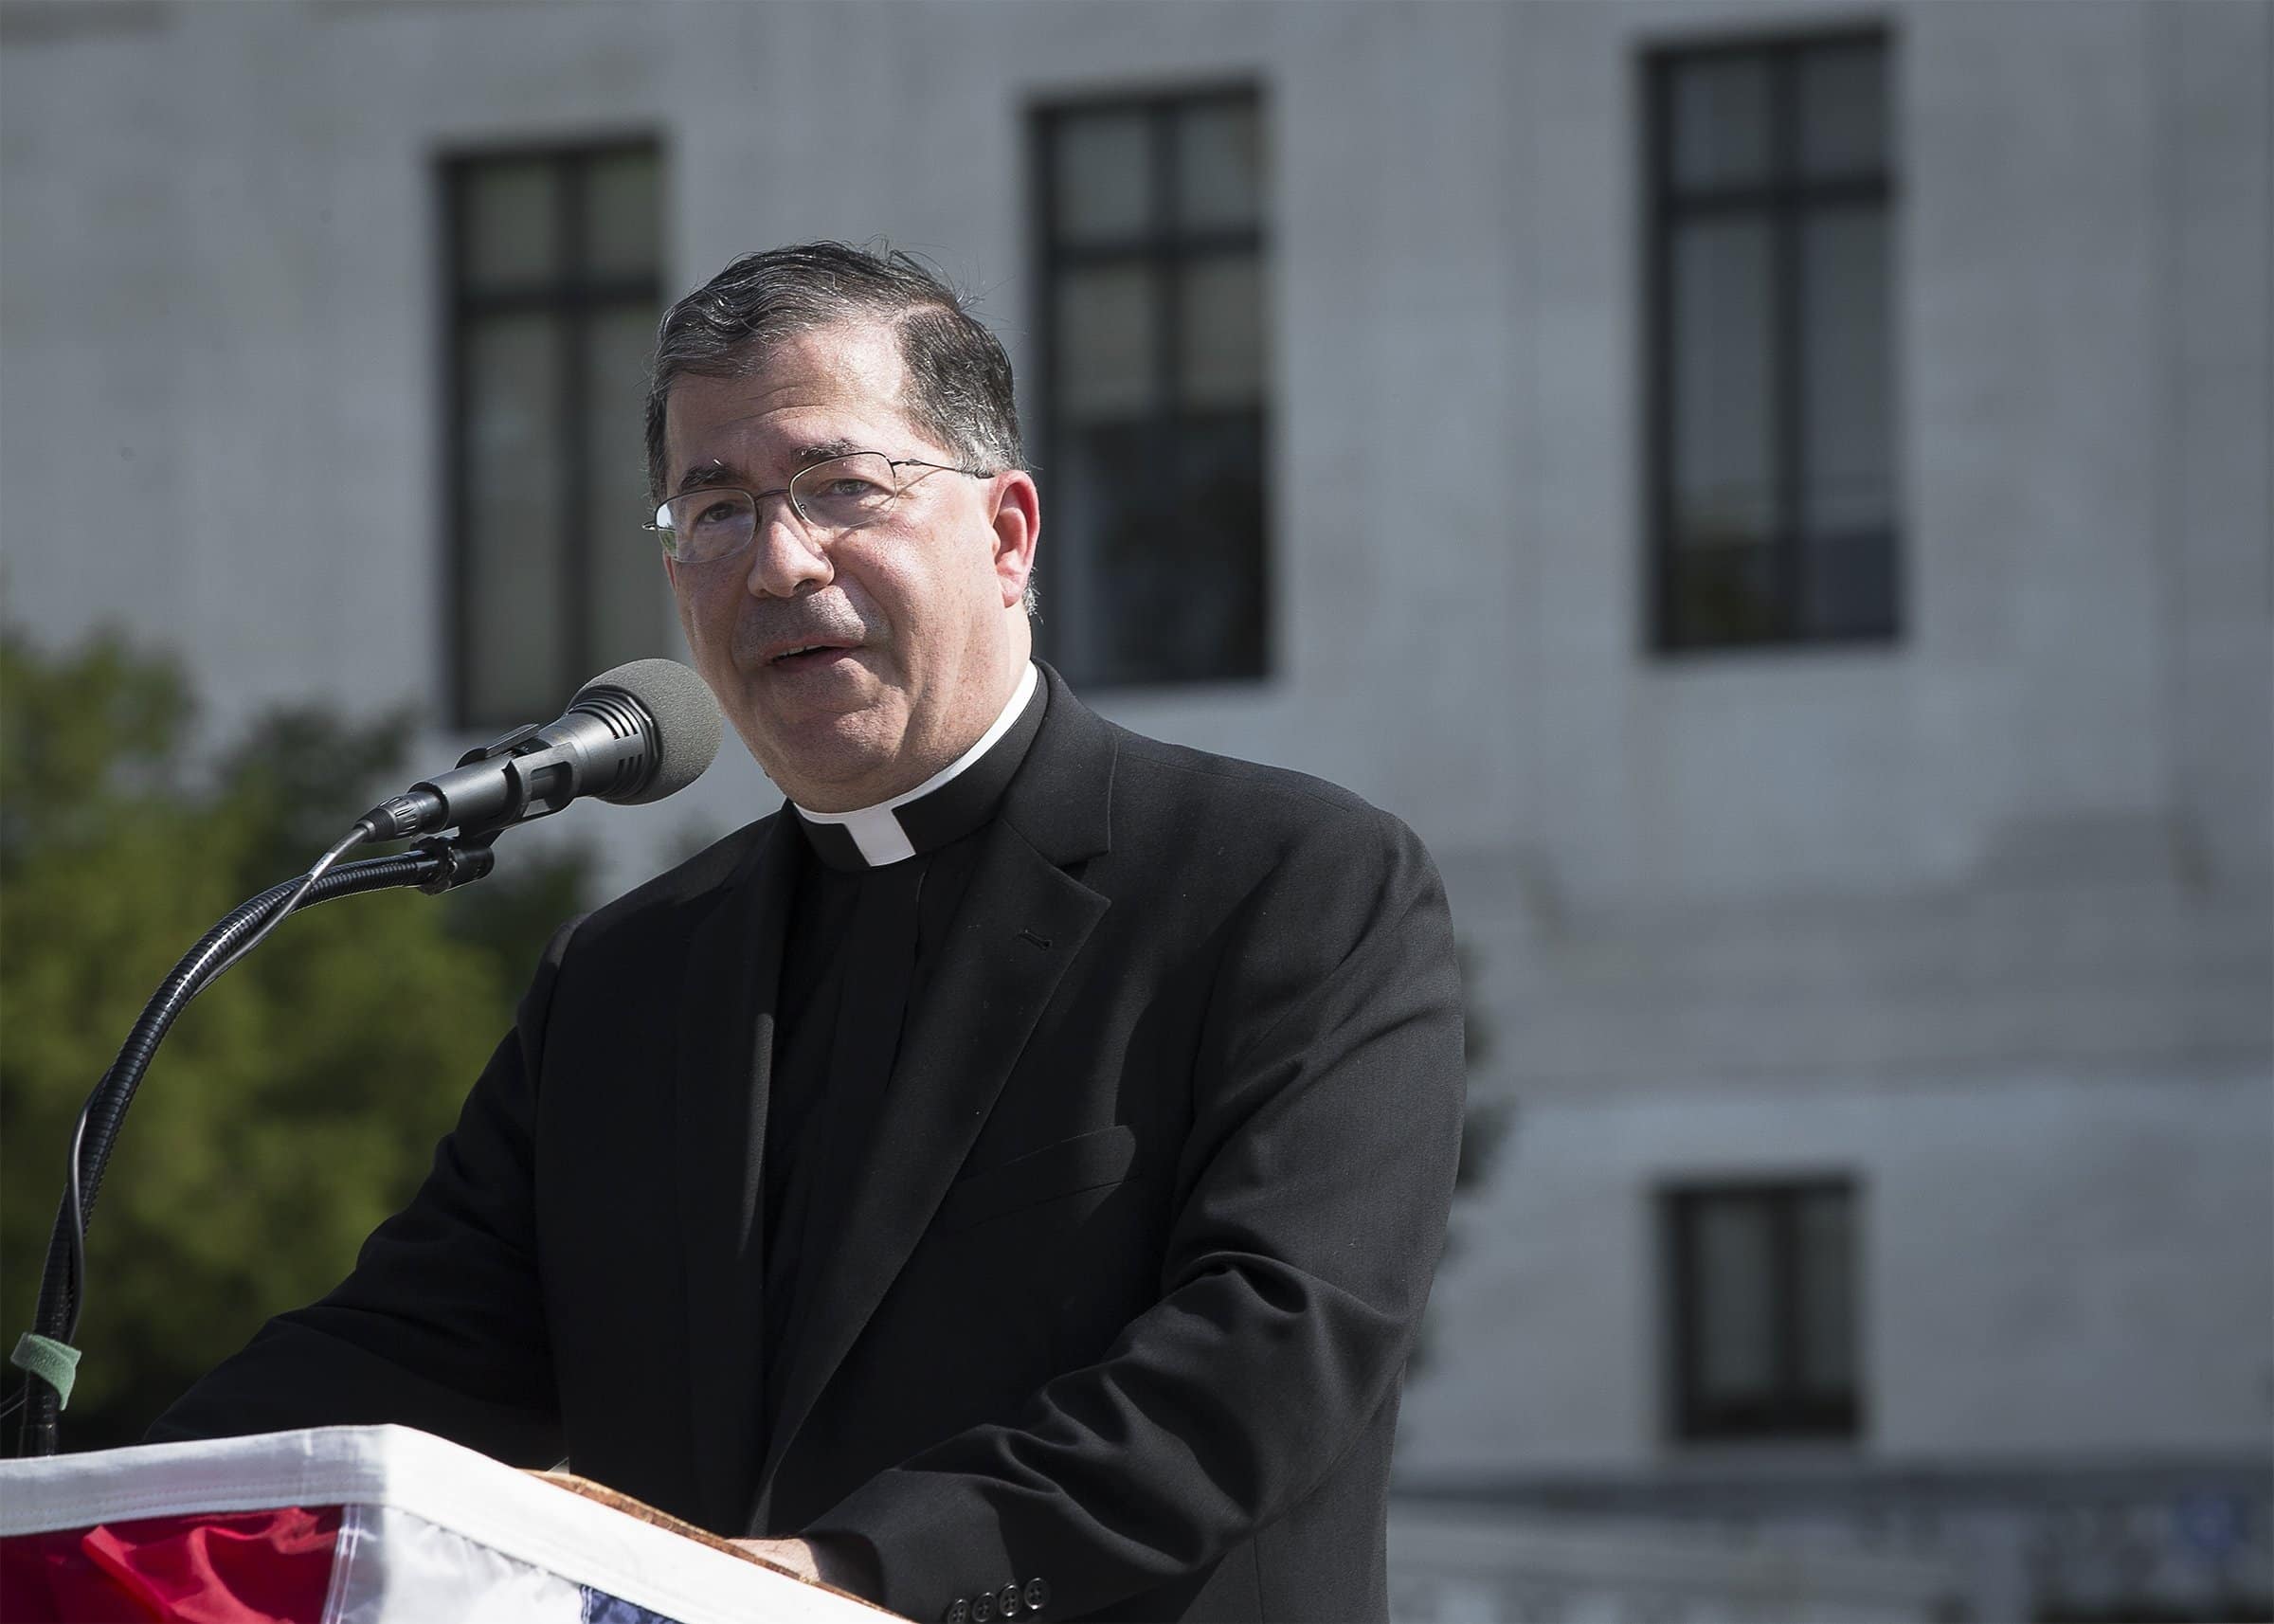 Father Frank Pavone, national director of Priests for Life, speaks in front of the U.S. Supreme Court in Washington Oct. 1, 2019. A Dec. 17, 2022, news report said Pavone had been dismissed from the clerical state for "blasphemous communications on social media" and "persistent disobedience of the lawful instructions of his diocesan bishop." (CNS photo/Tyler Orsburn)